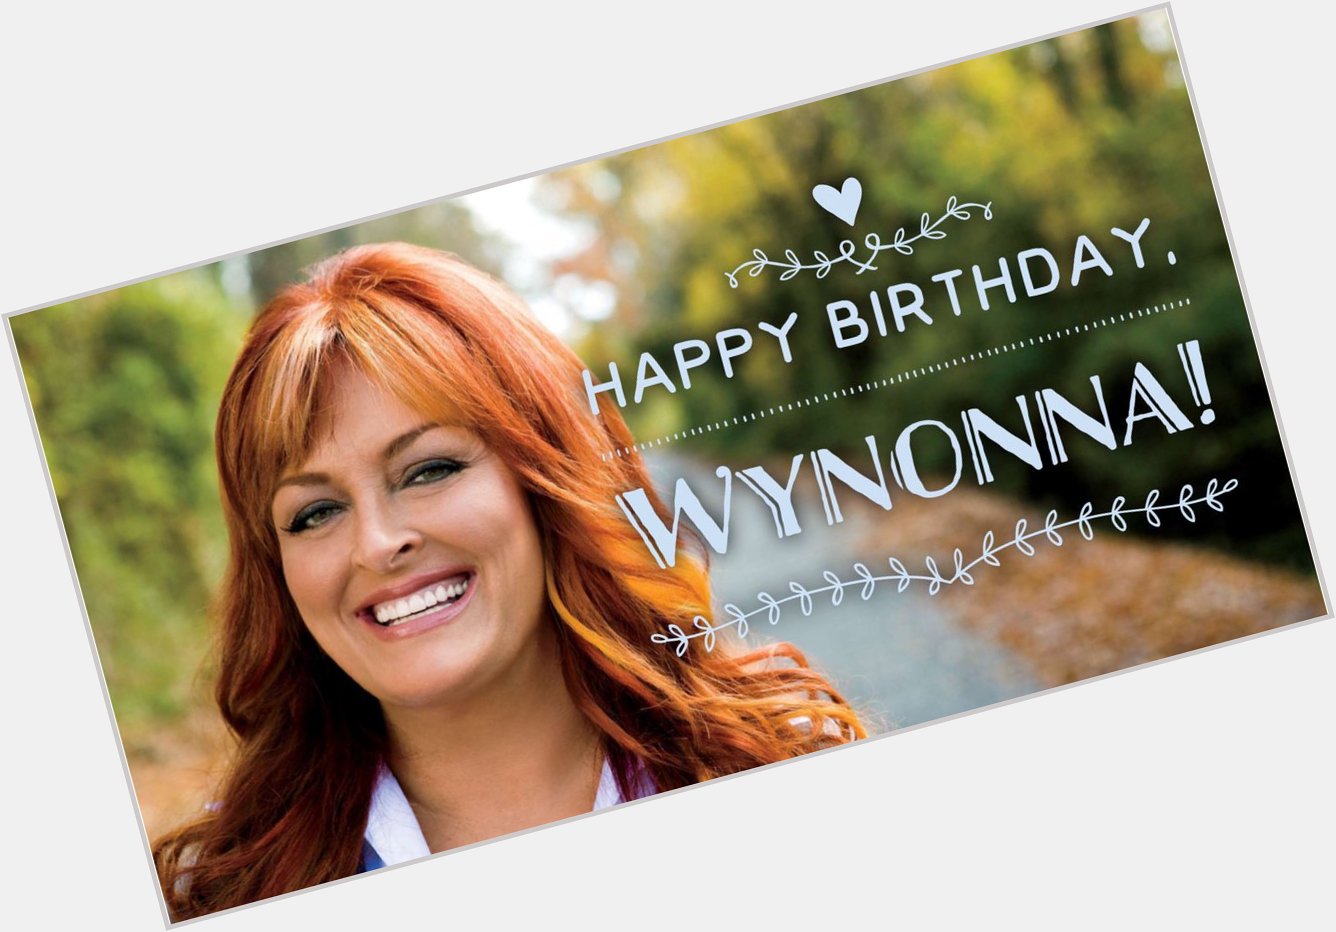 Happy Birthday, Wynonna Judd! What s your favorite song from Wynonna or The Judds?  